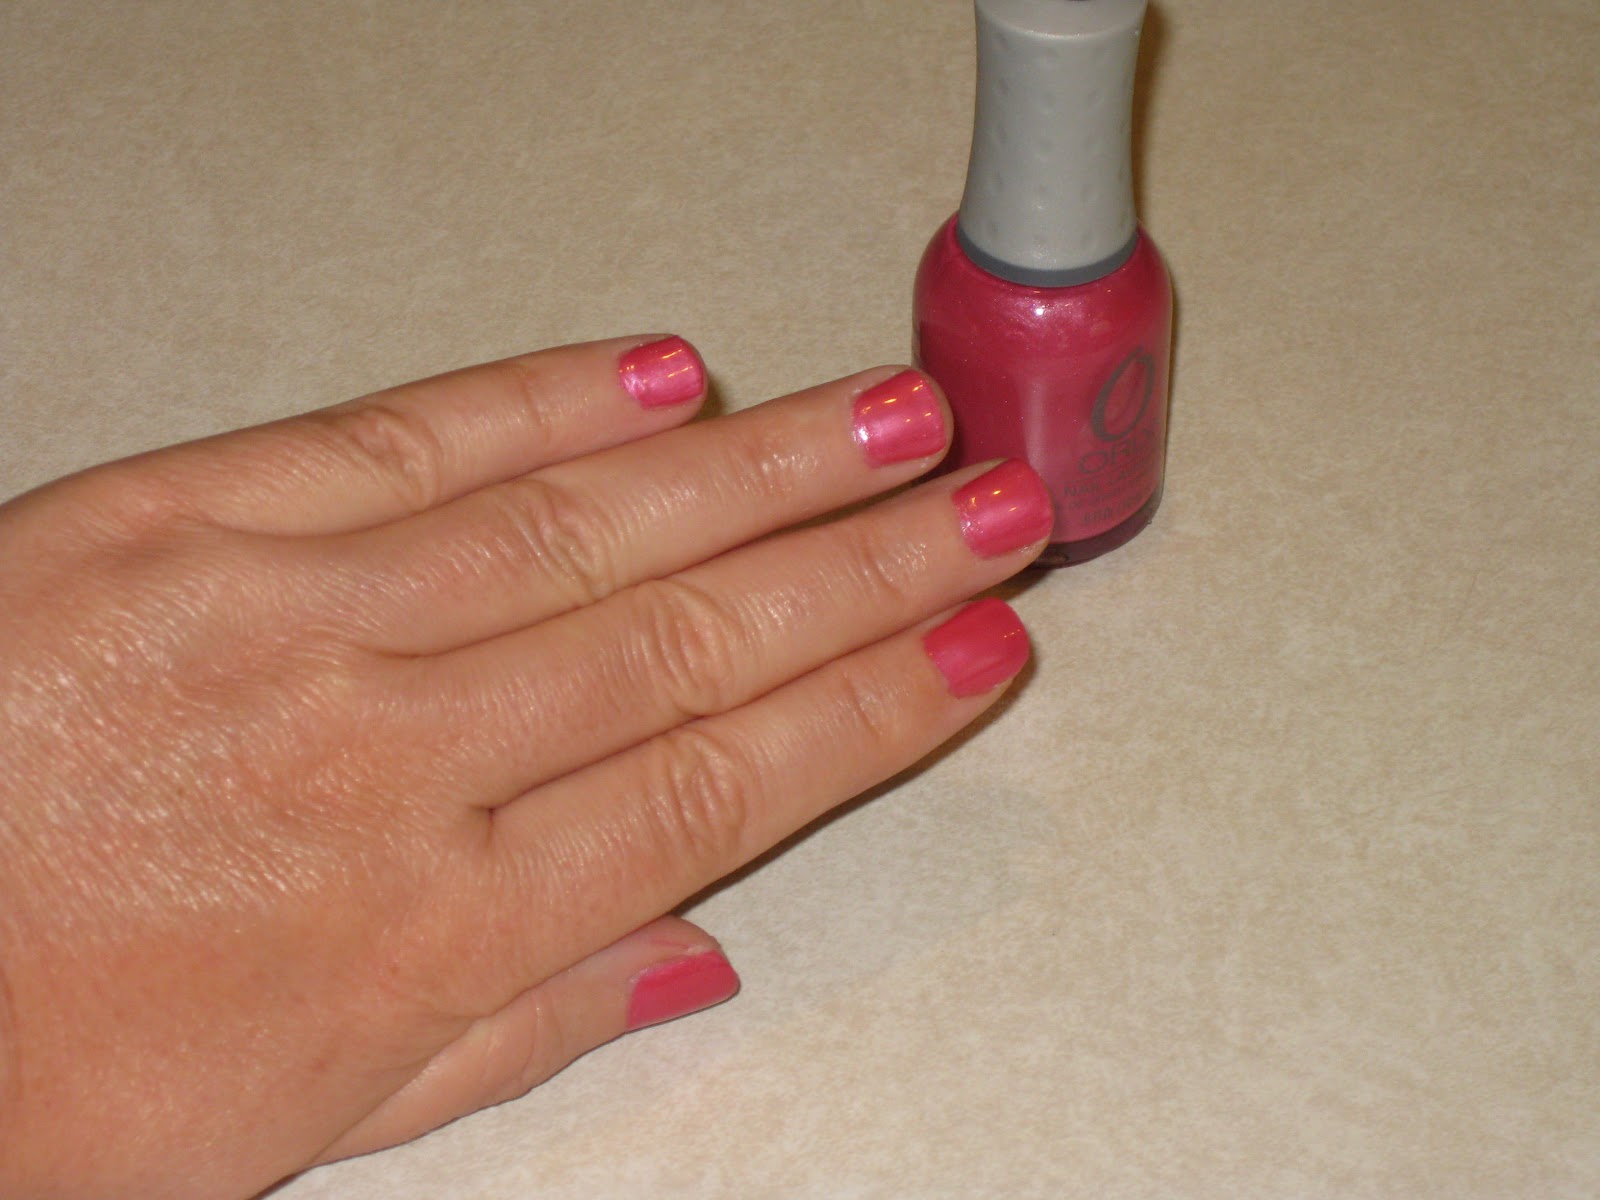 9. Orly Nail Lacquer in "Shoe Stopper" - wide 7